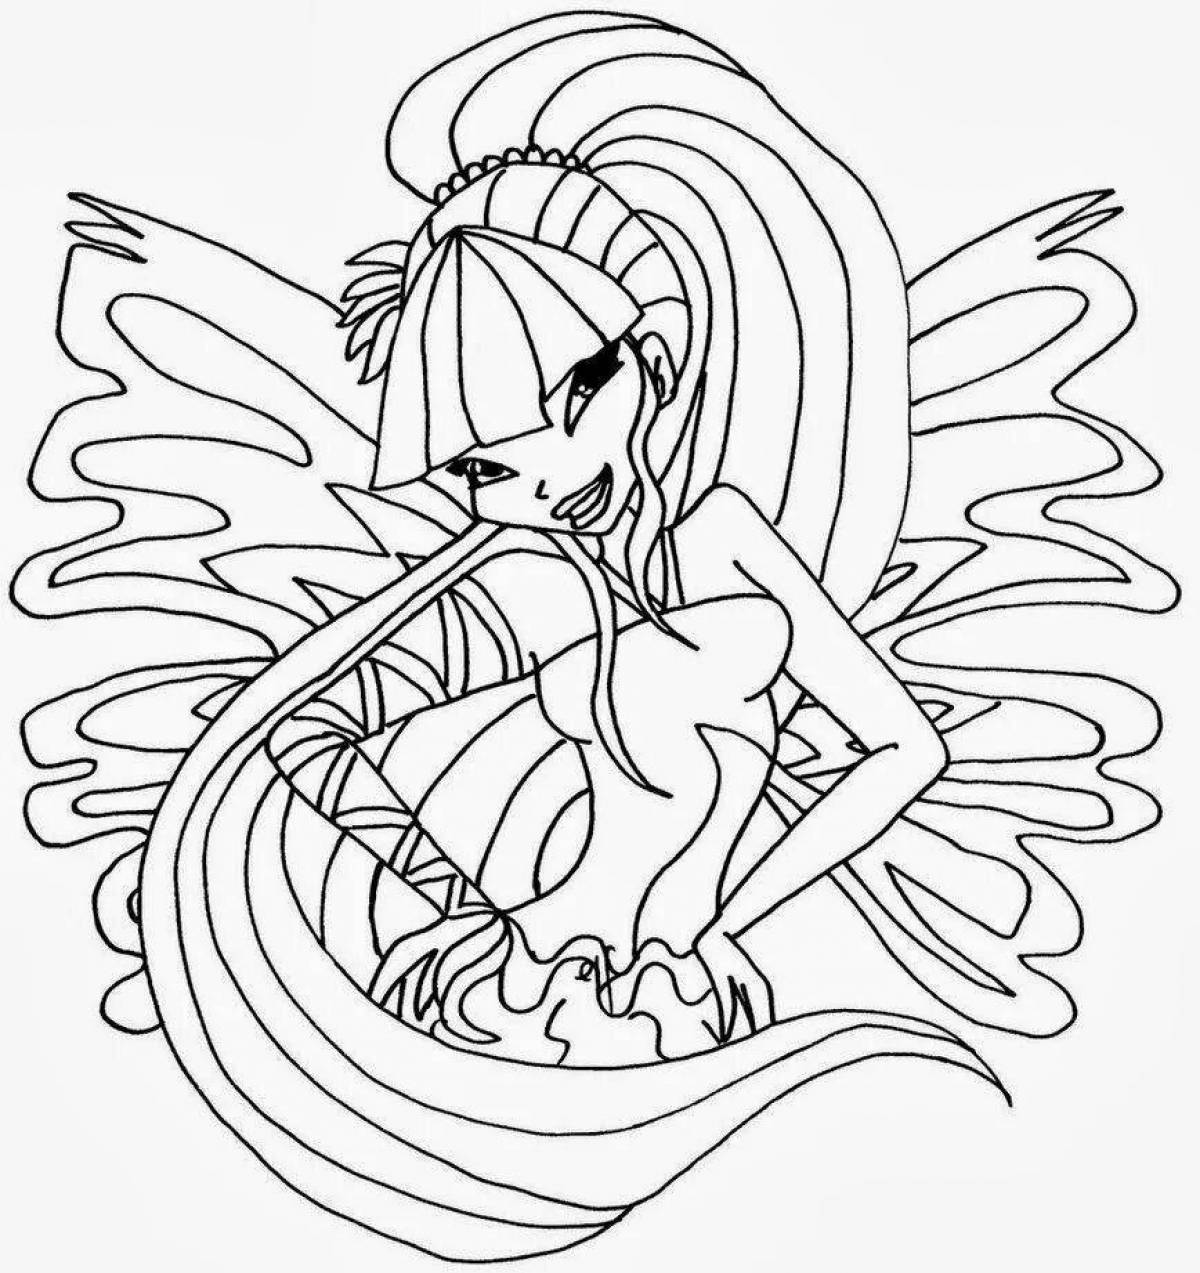 Joyful winx coloring for android